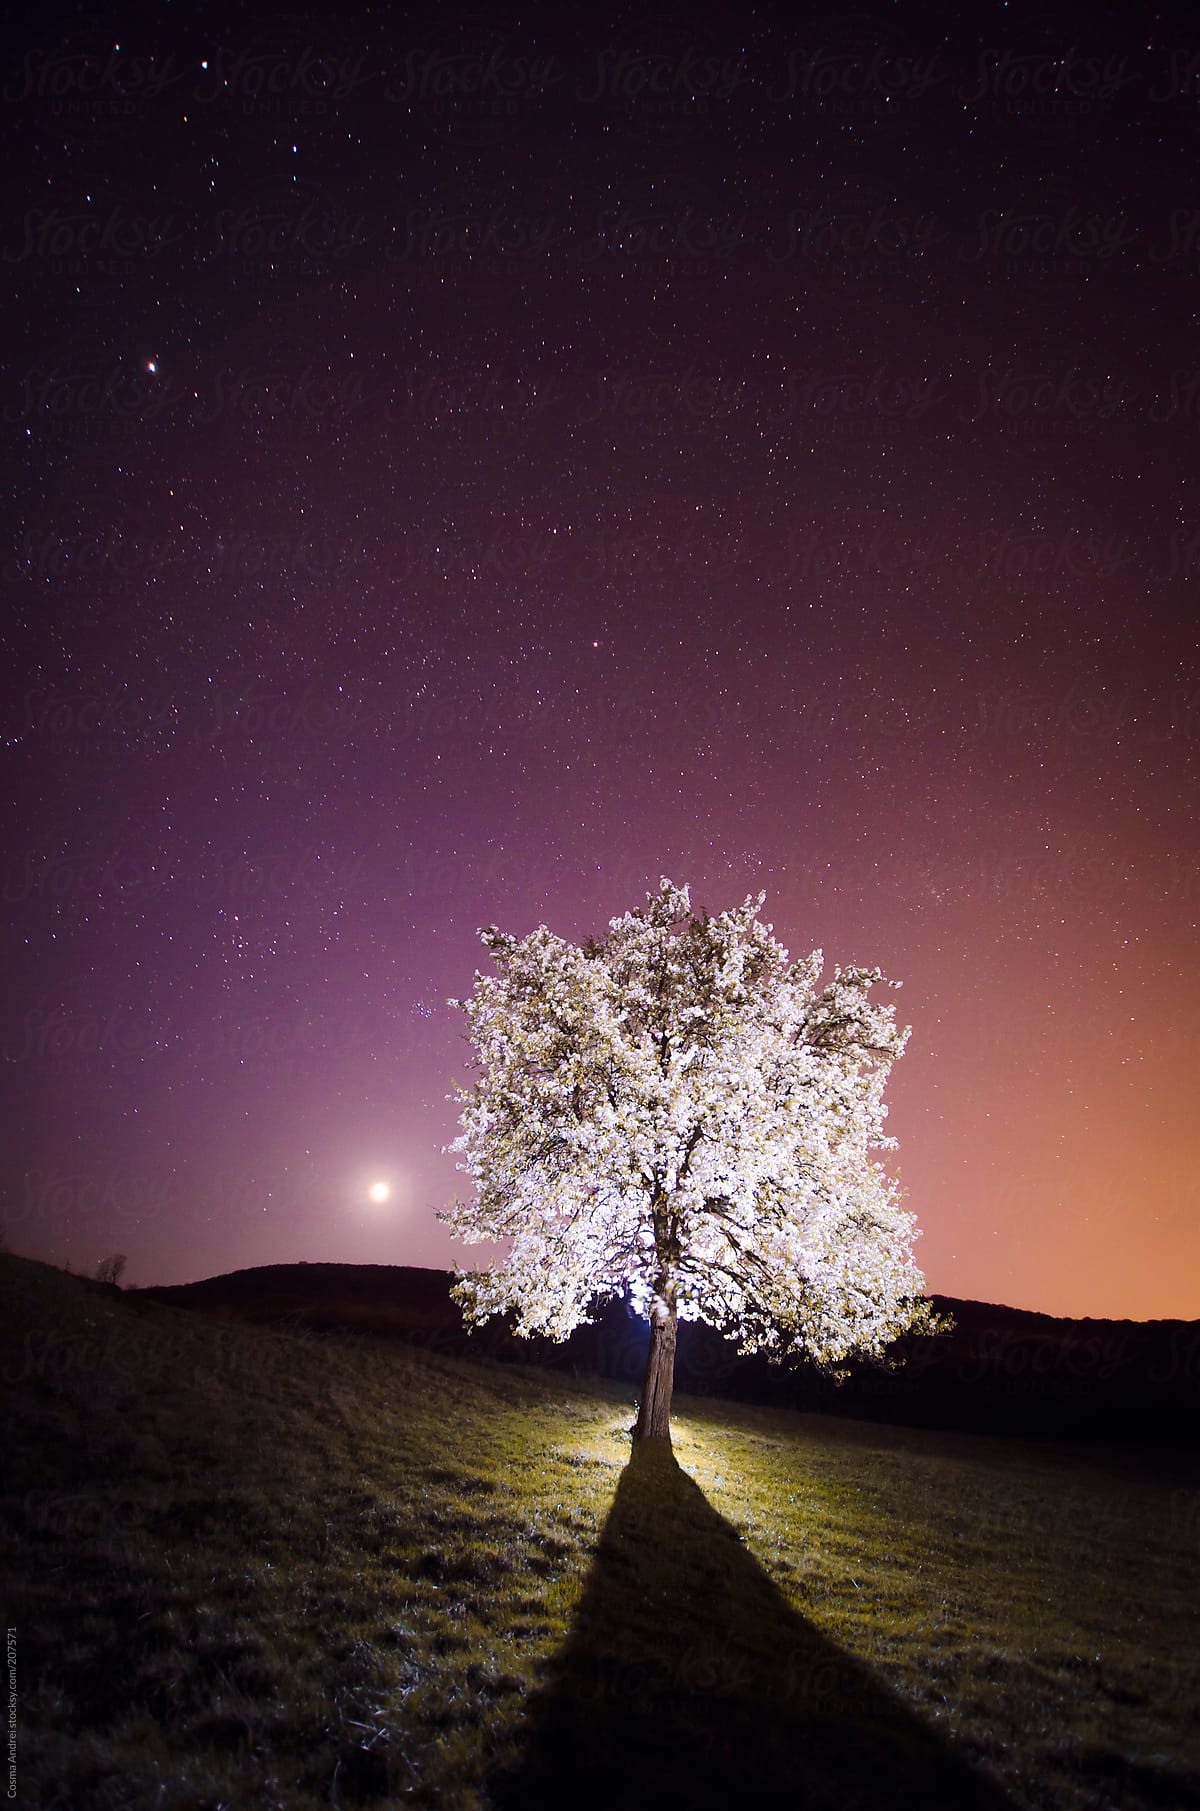 Tree in bloom at night with colorful sky and moon